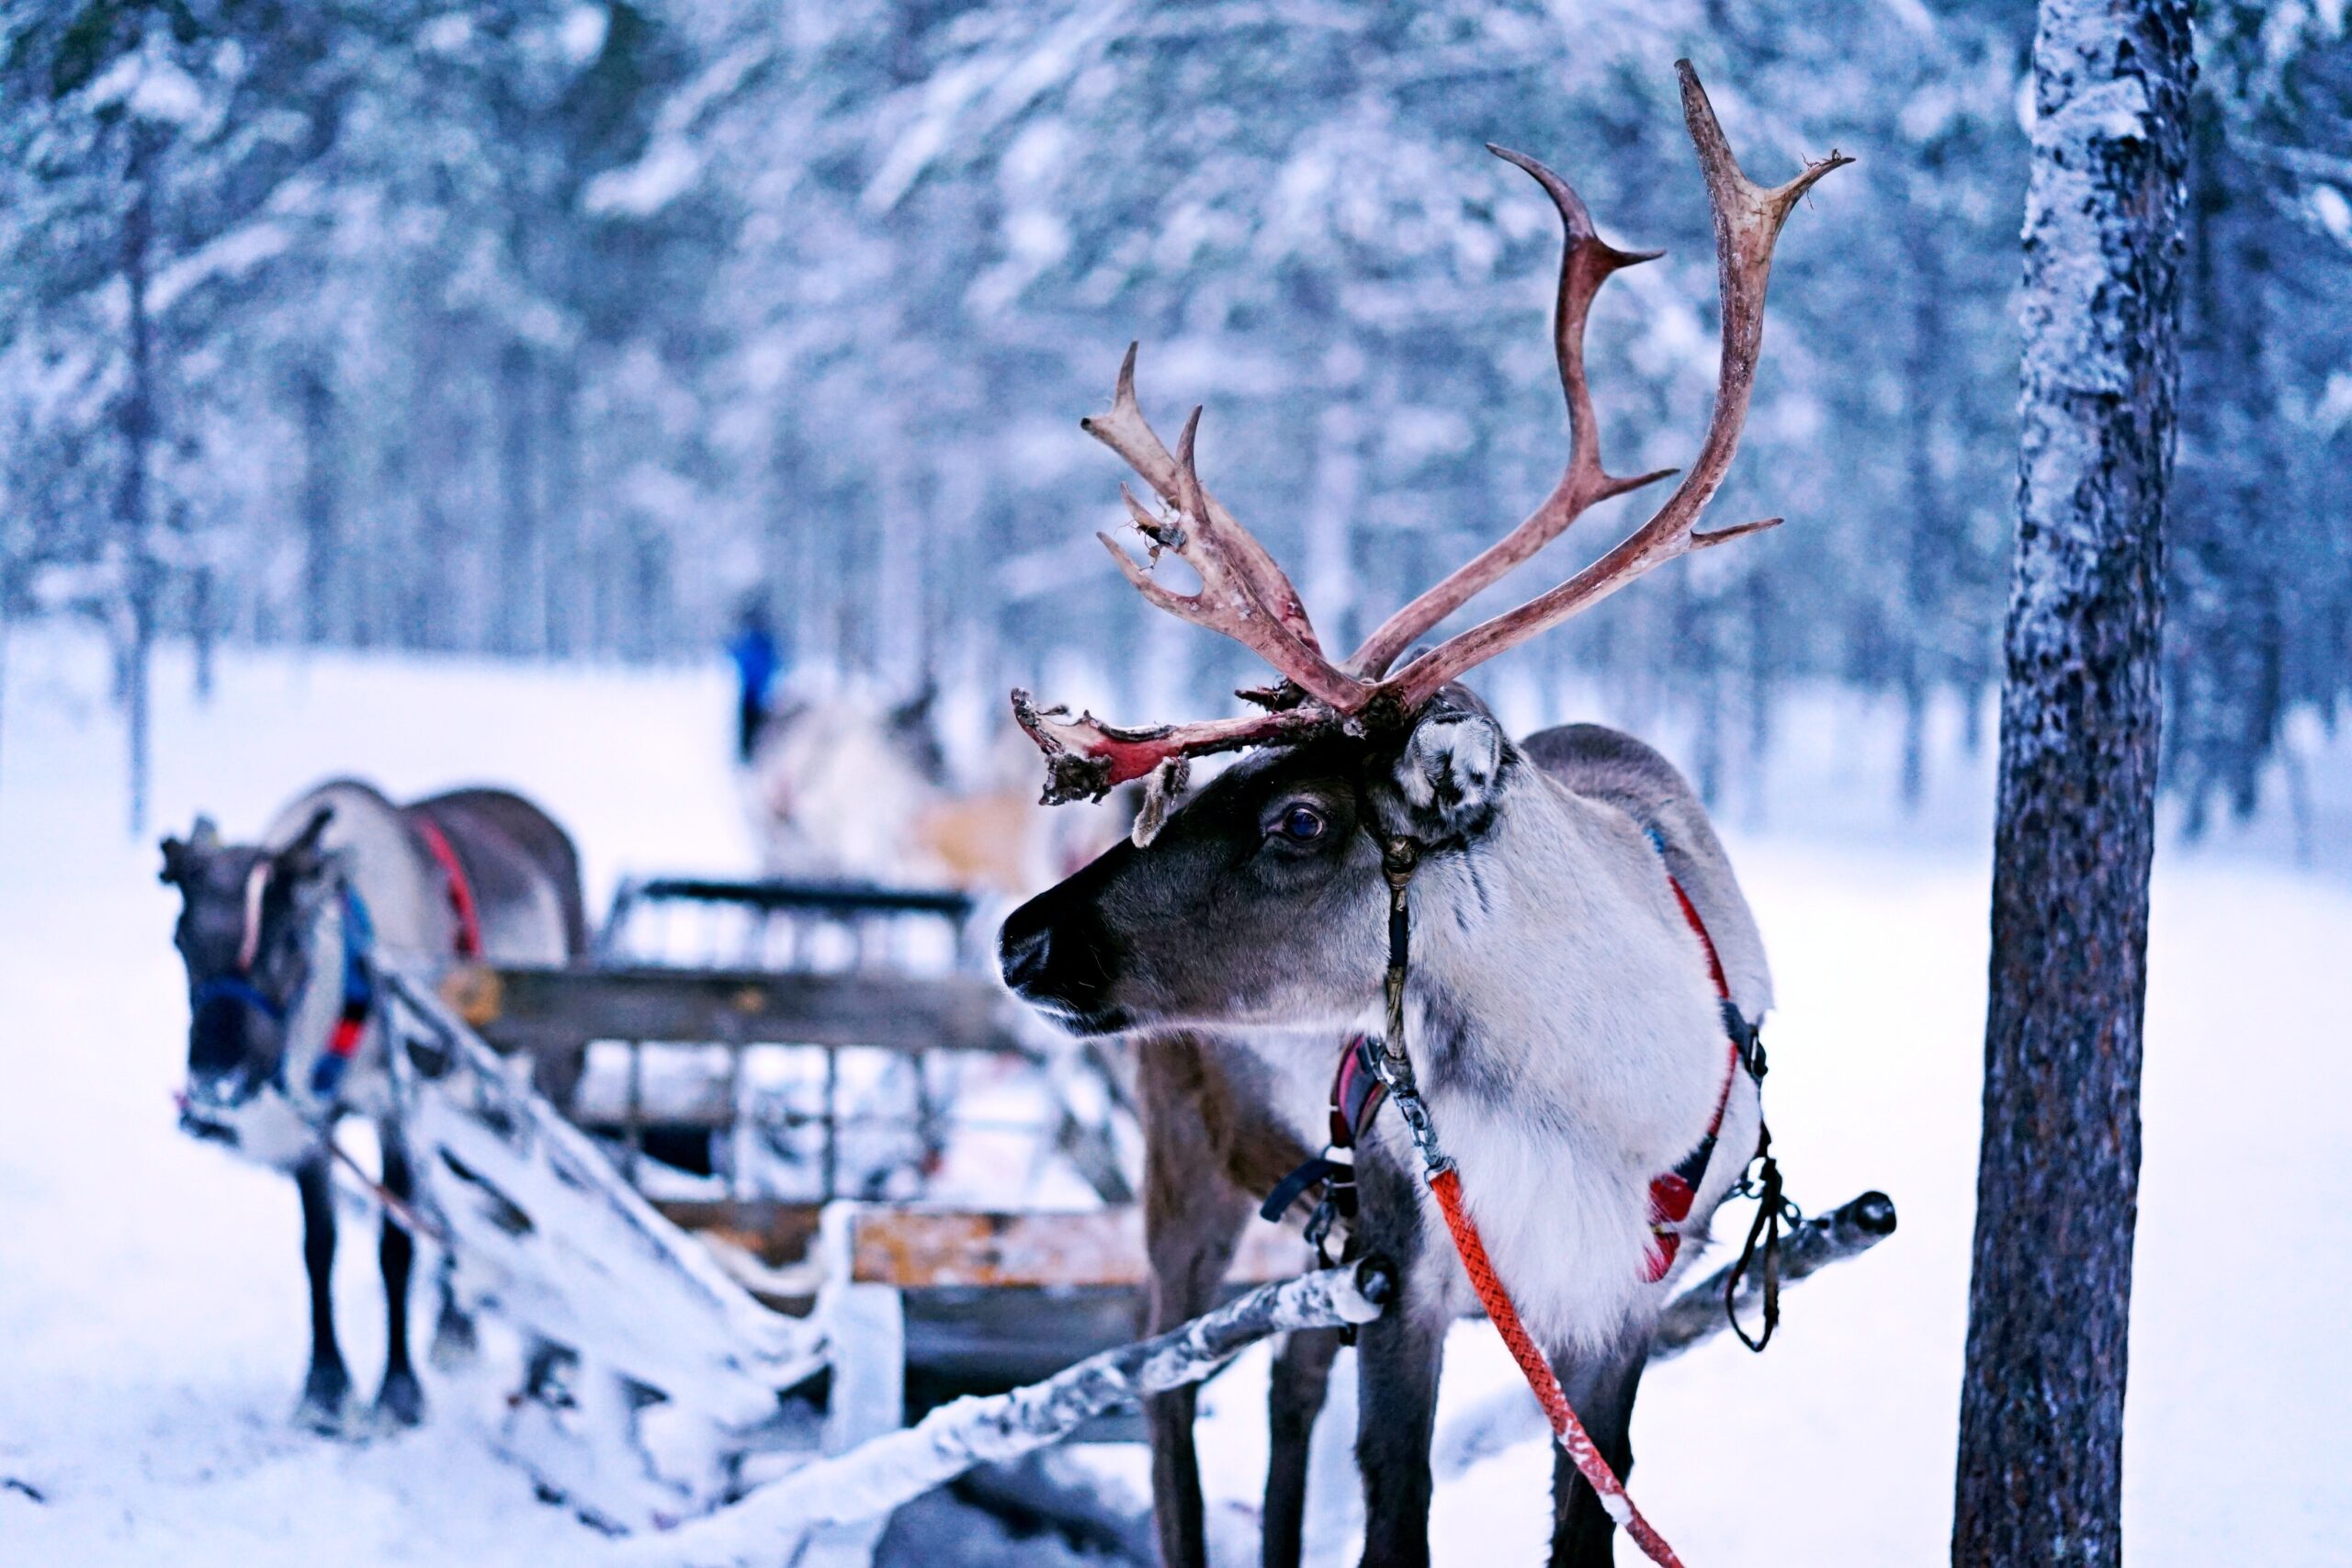 Whose Insurance Covers Grandma if She’s Run Over by a Reindeer?